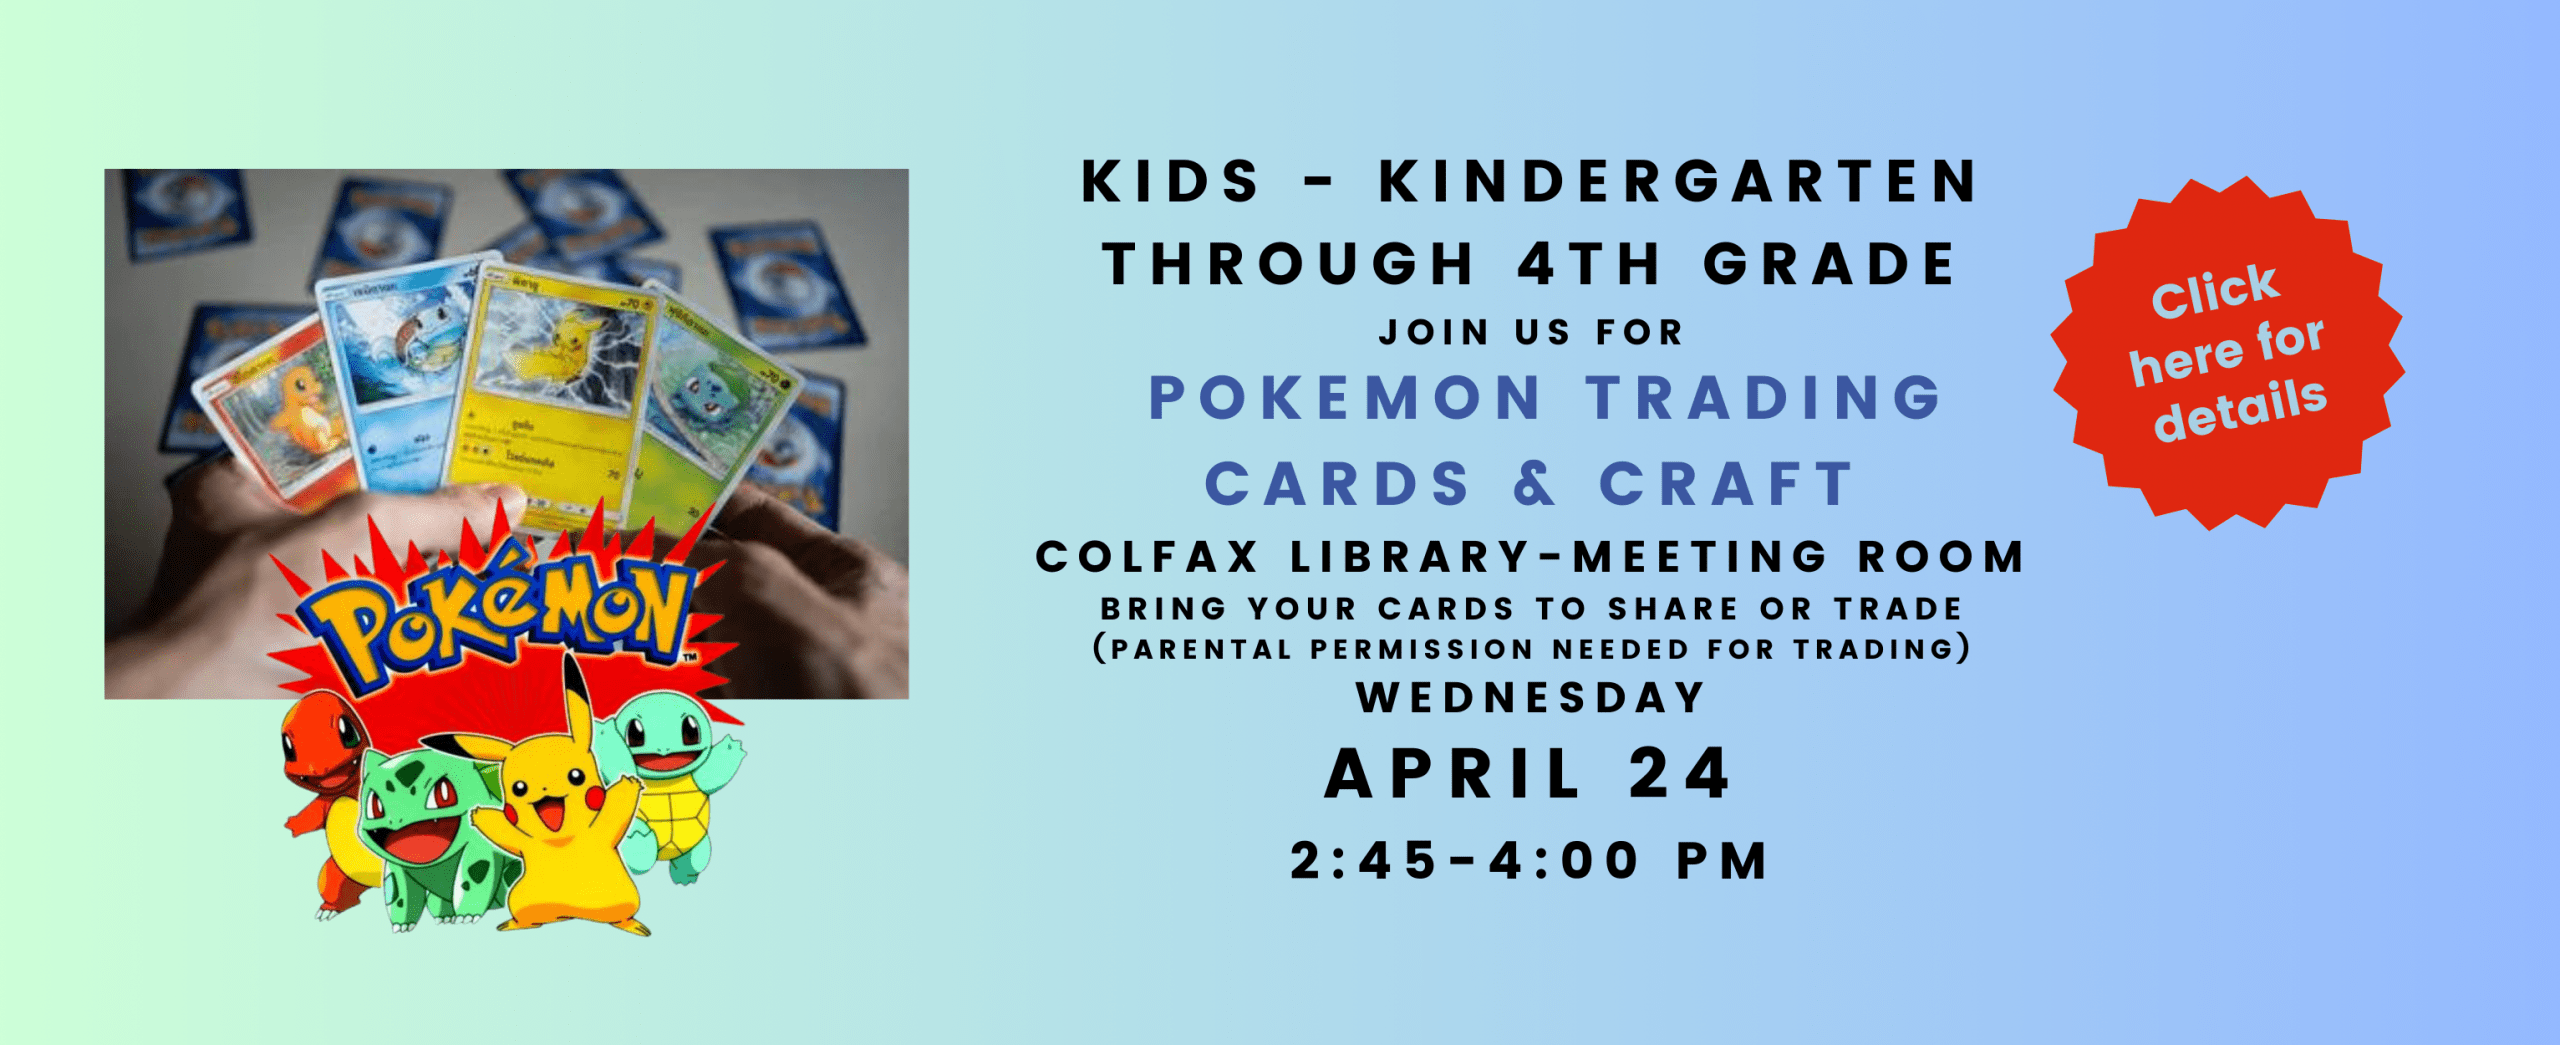 Don't miss the second Pokemon Trading program this month, at the Colfax Library. April 24, for grades K-4. Click here for details. 